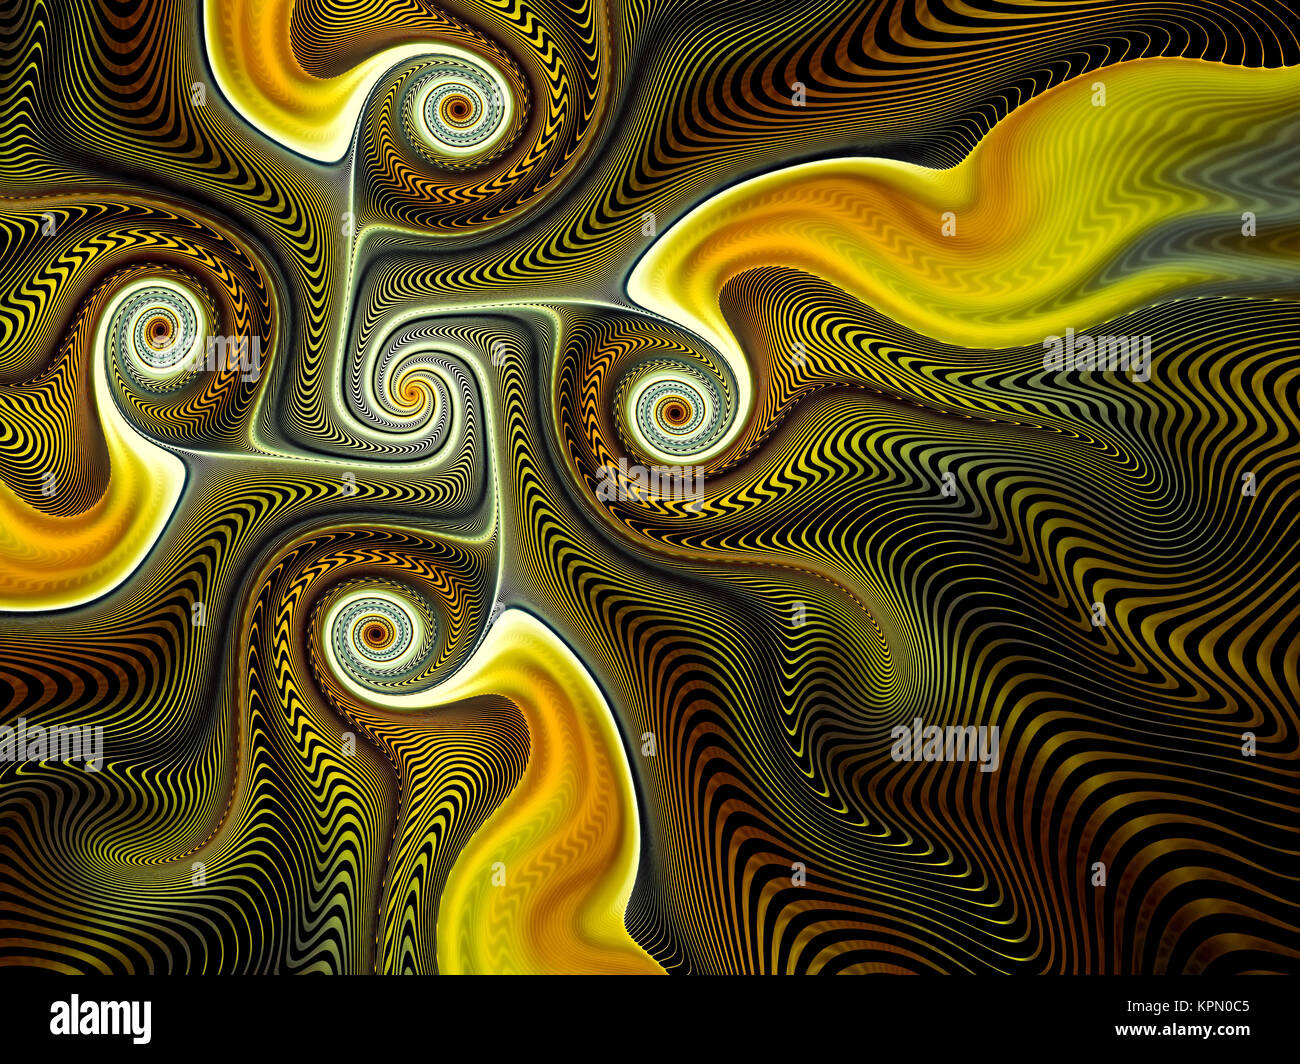 Abstract  ethnic ornament - digitally generated image Stock Photo